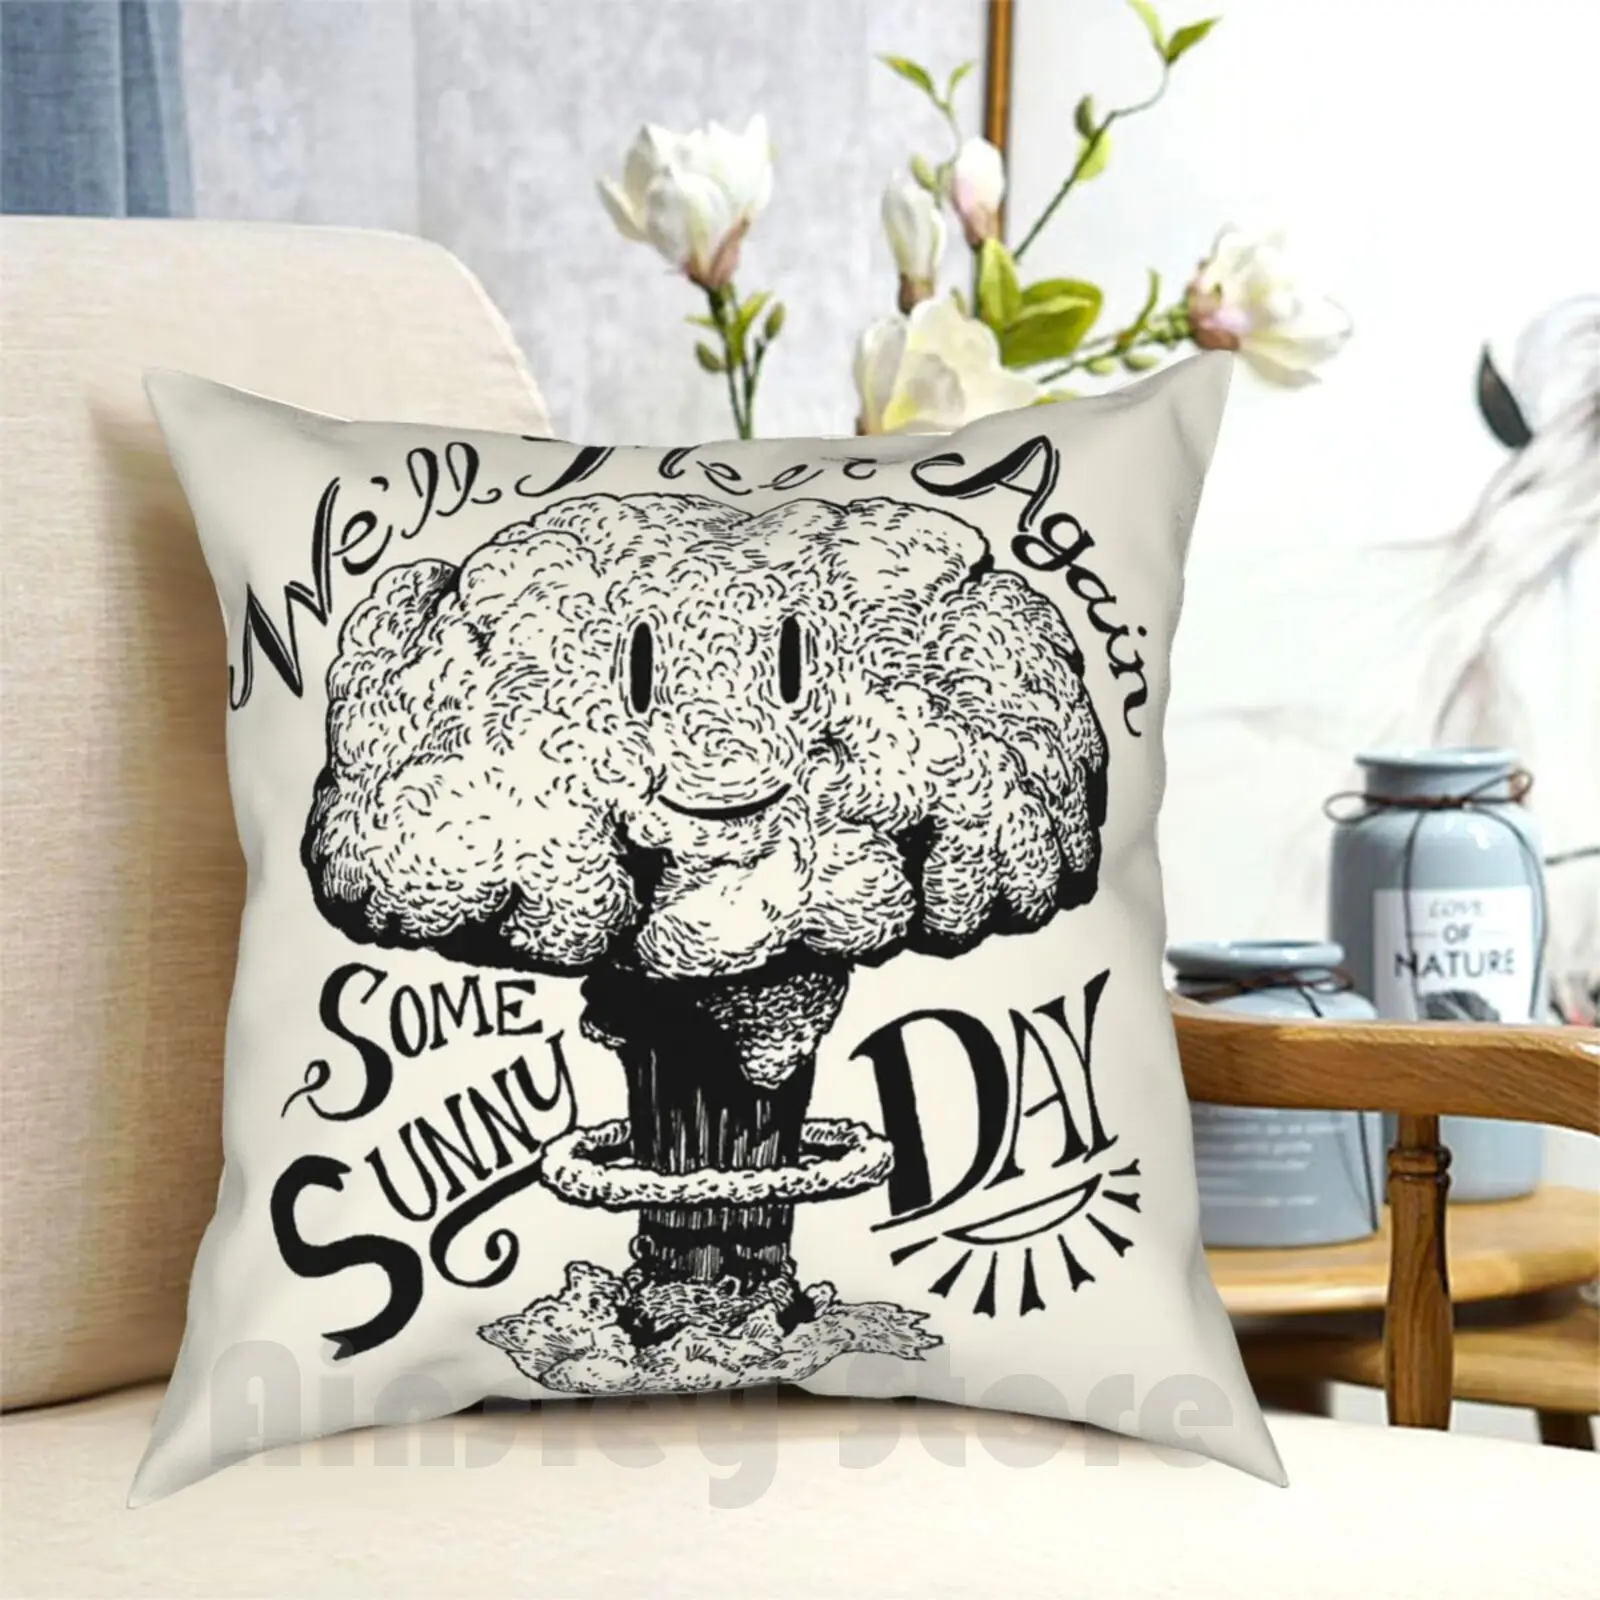 

We'Ll Meet Again Some Sunny Day Pillow Case Printed Home Soft DIY Pillow cover Movies Fan Art Dr Strangelove Stanley